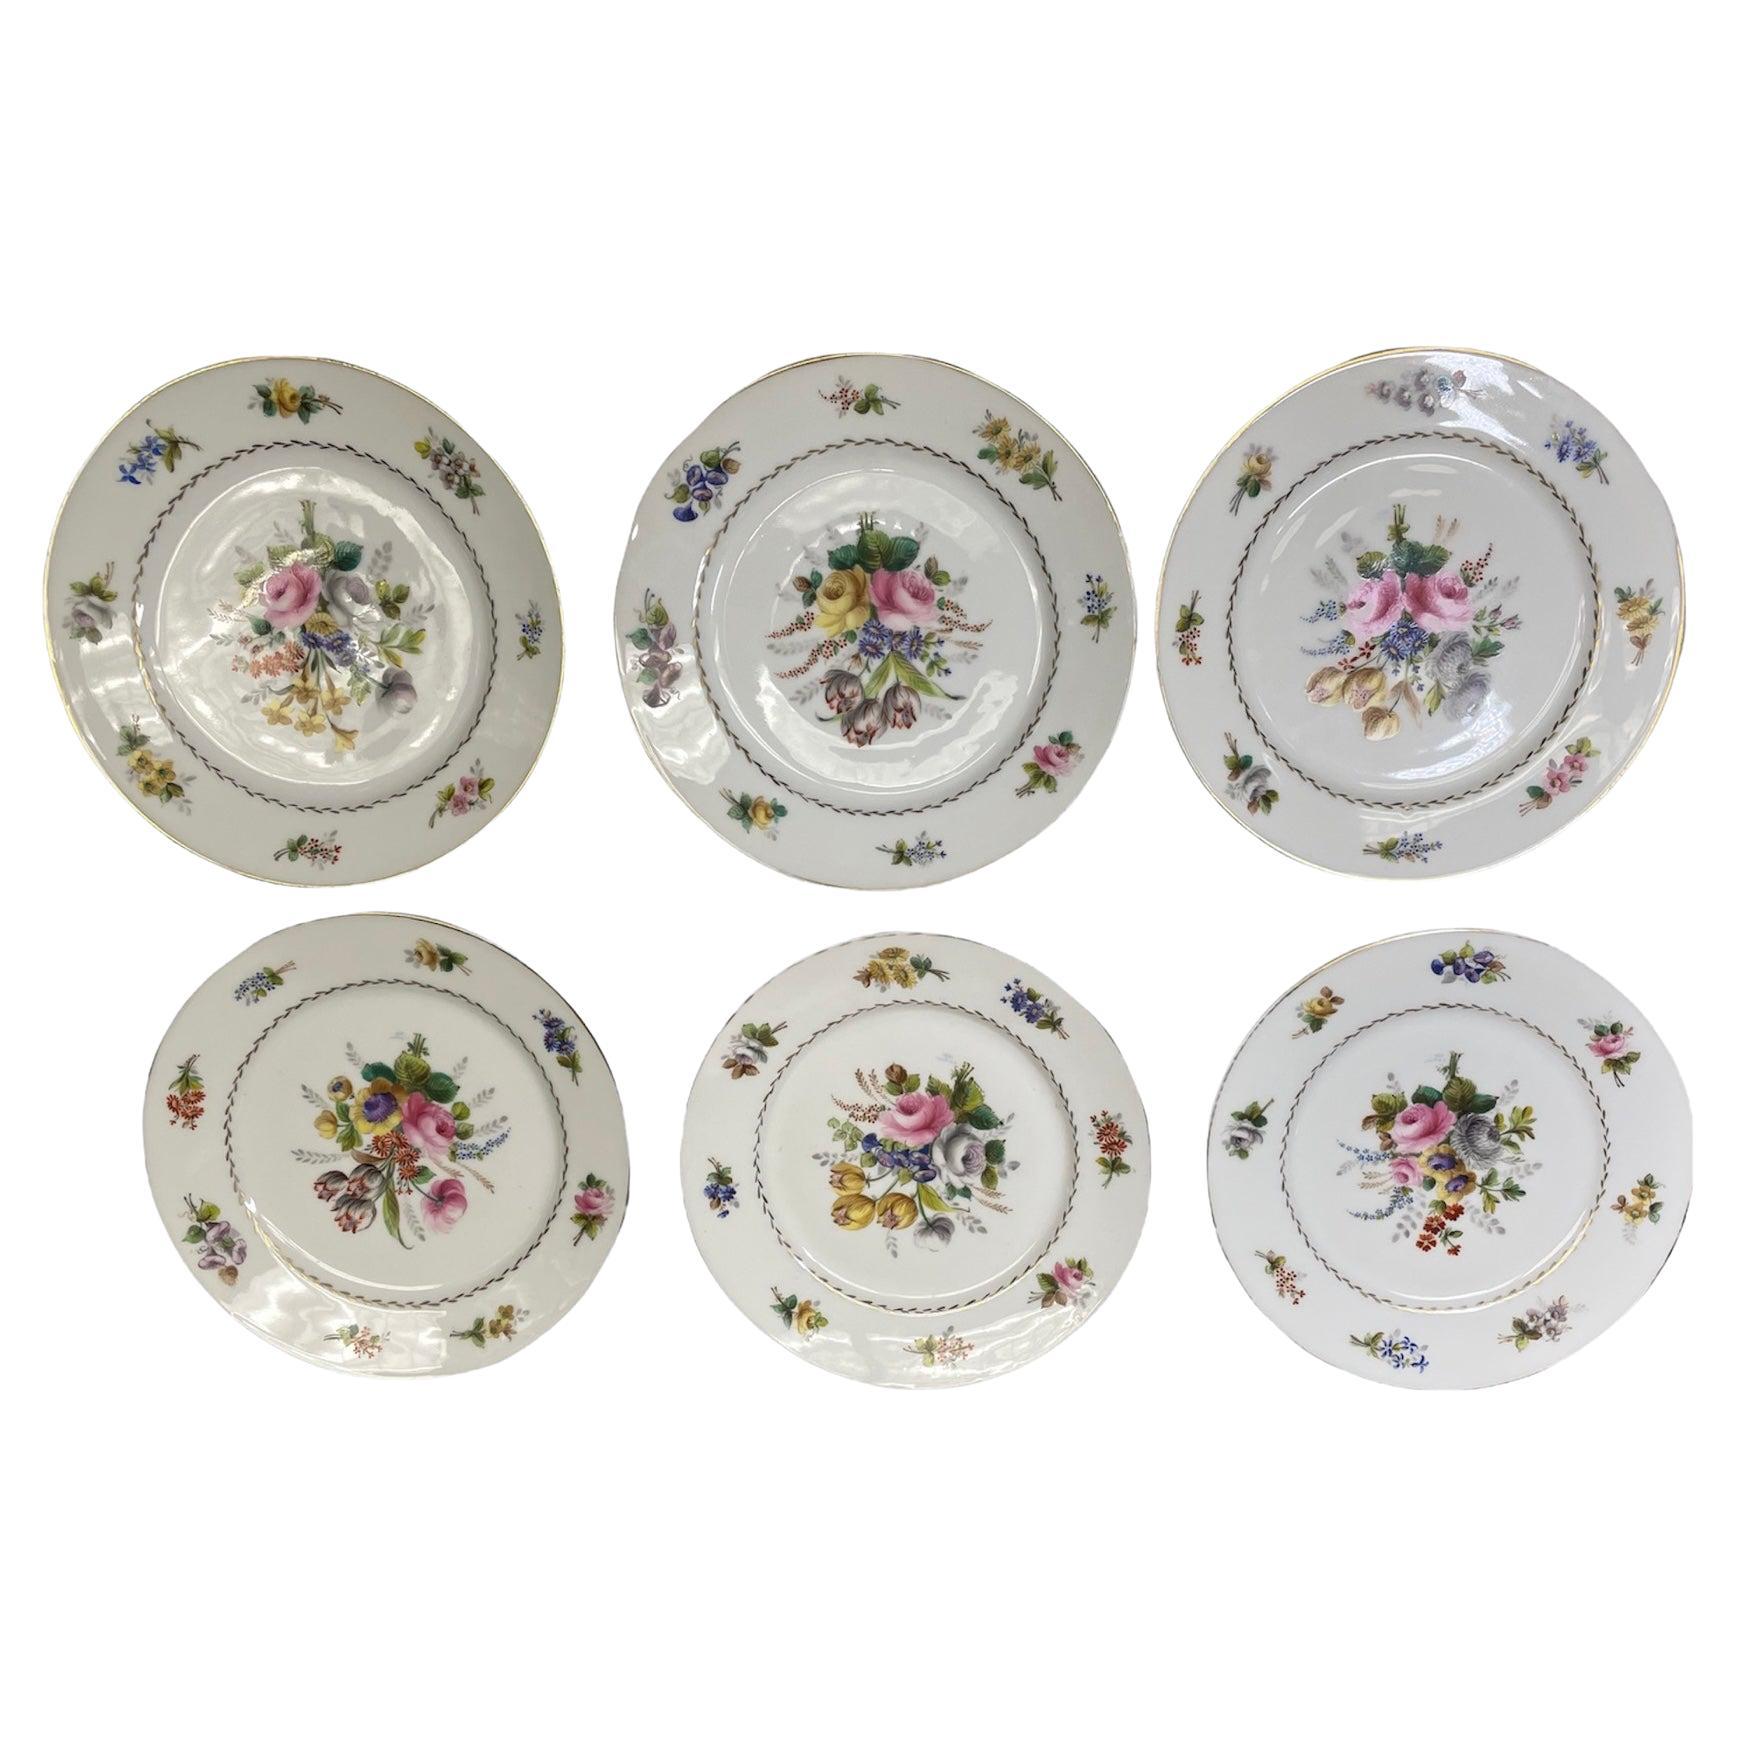 Set of Six Porcelain Plates from the Collection of the Manoir of Montsalvy For Sale